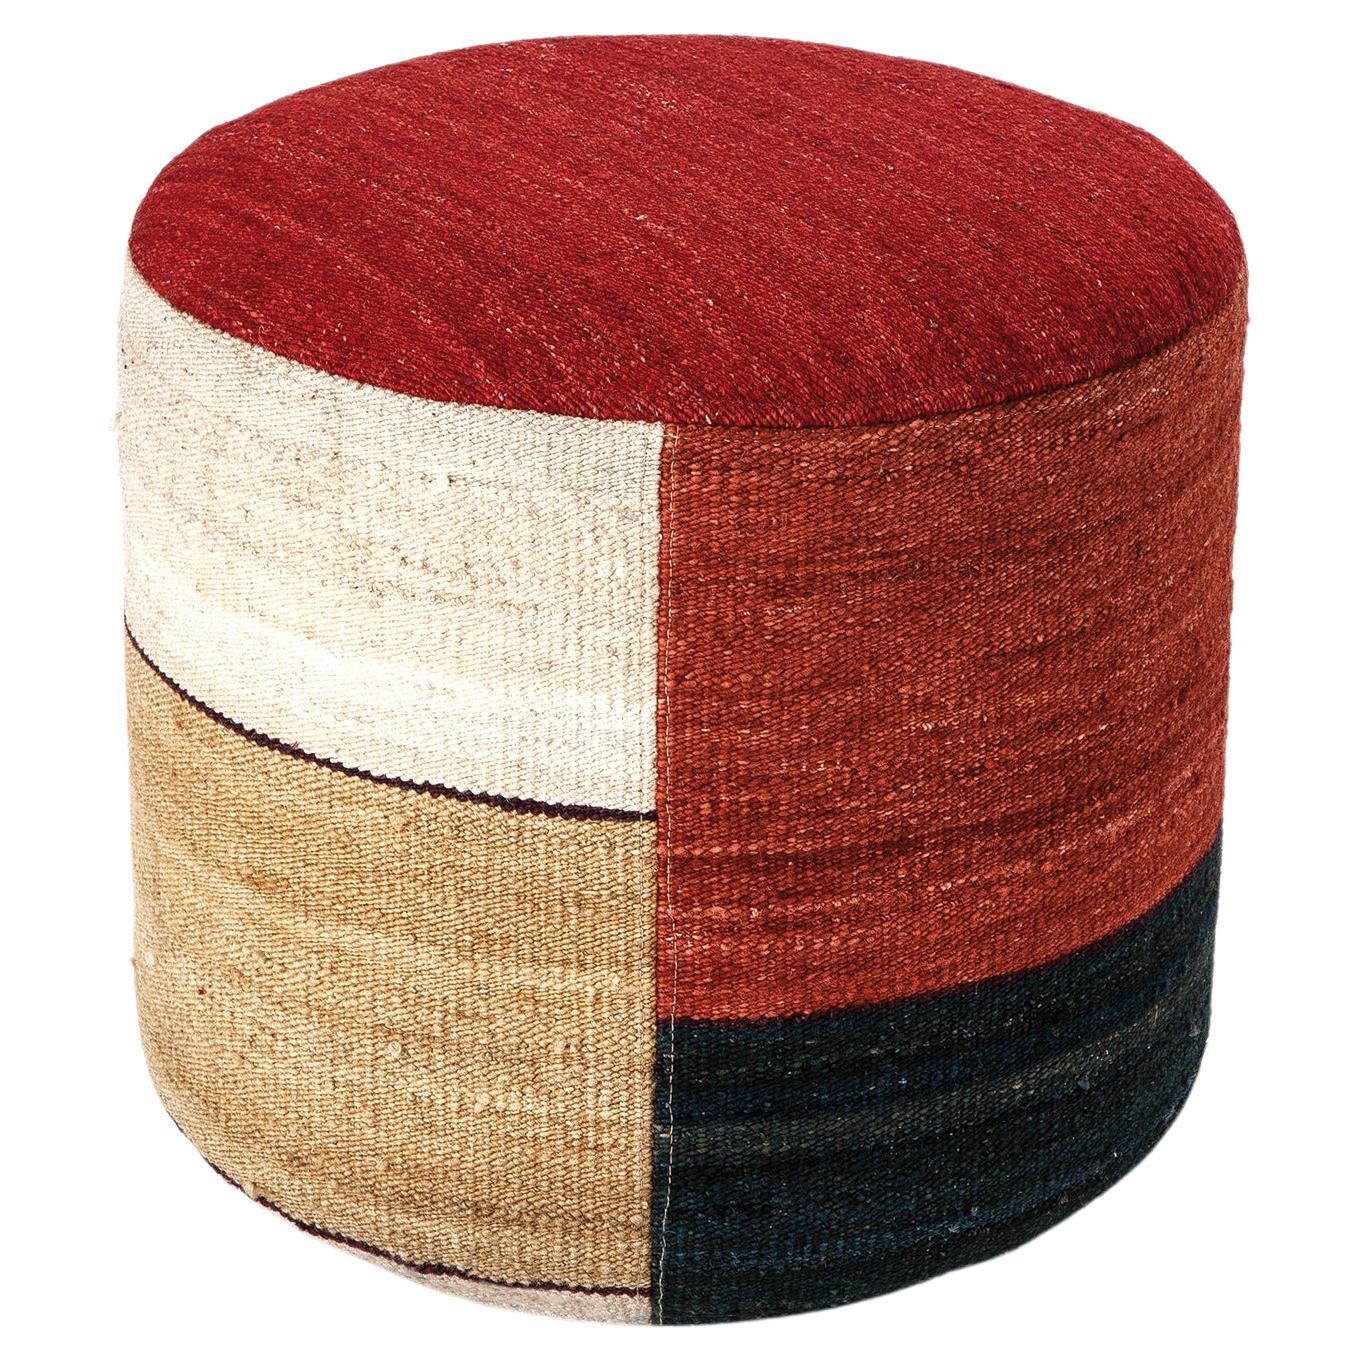 'Kilim 3' Pouf by Nani Marquina and Marcos Catalán for Nanimarquina